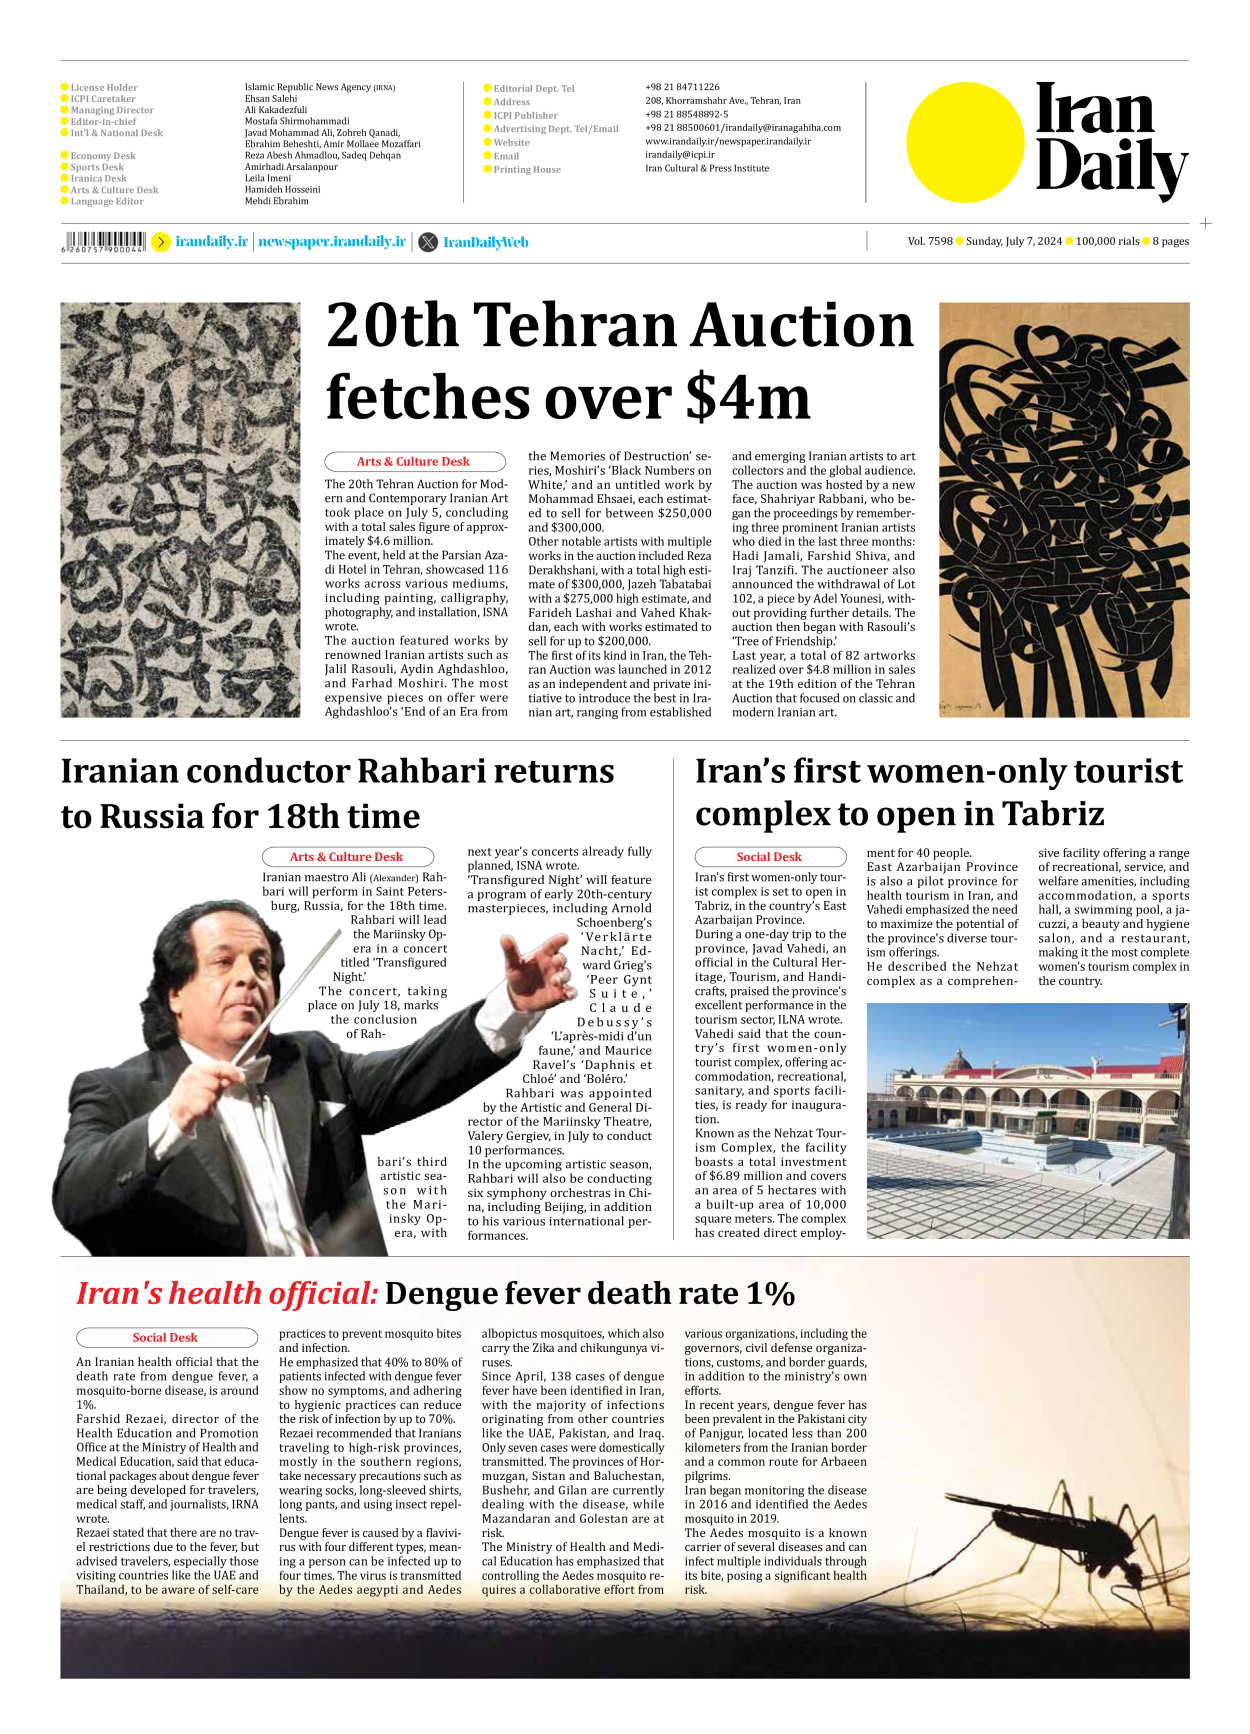 Iran Daily - Number Seven Thousand Five Hundred and Ninety Eight - 07 July 2024 - Page 8